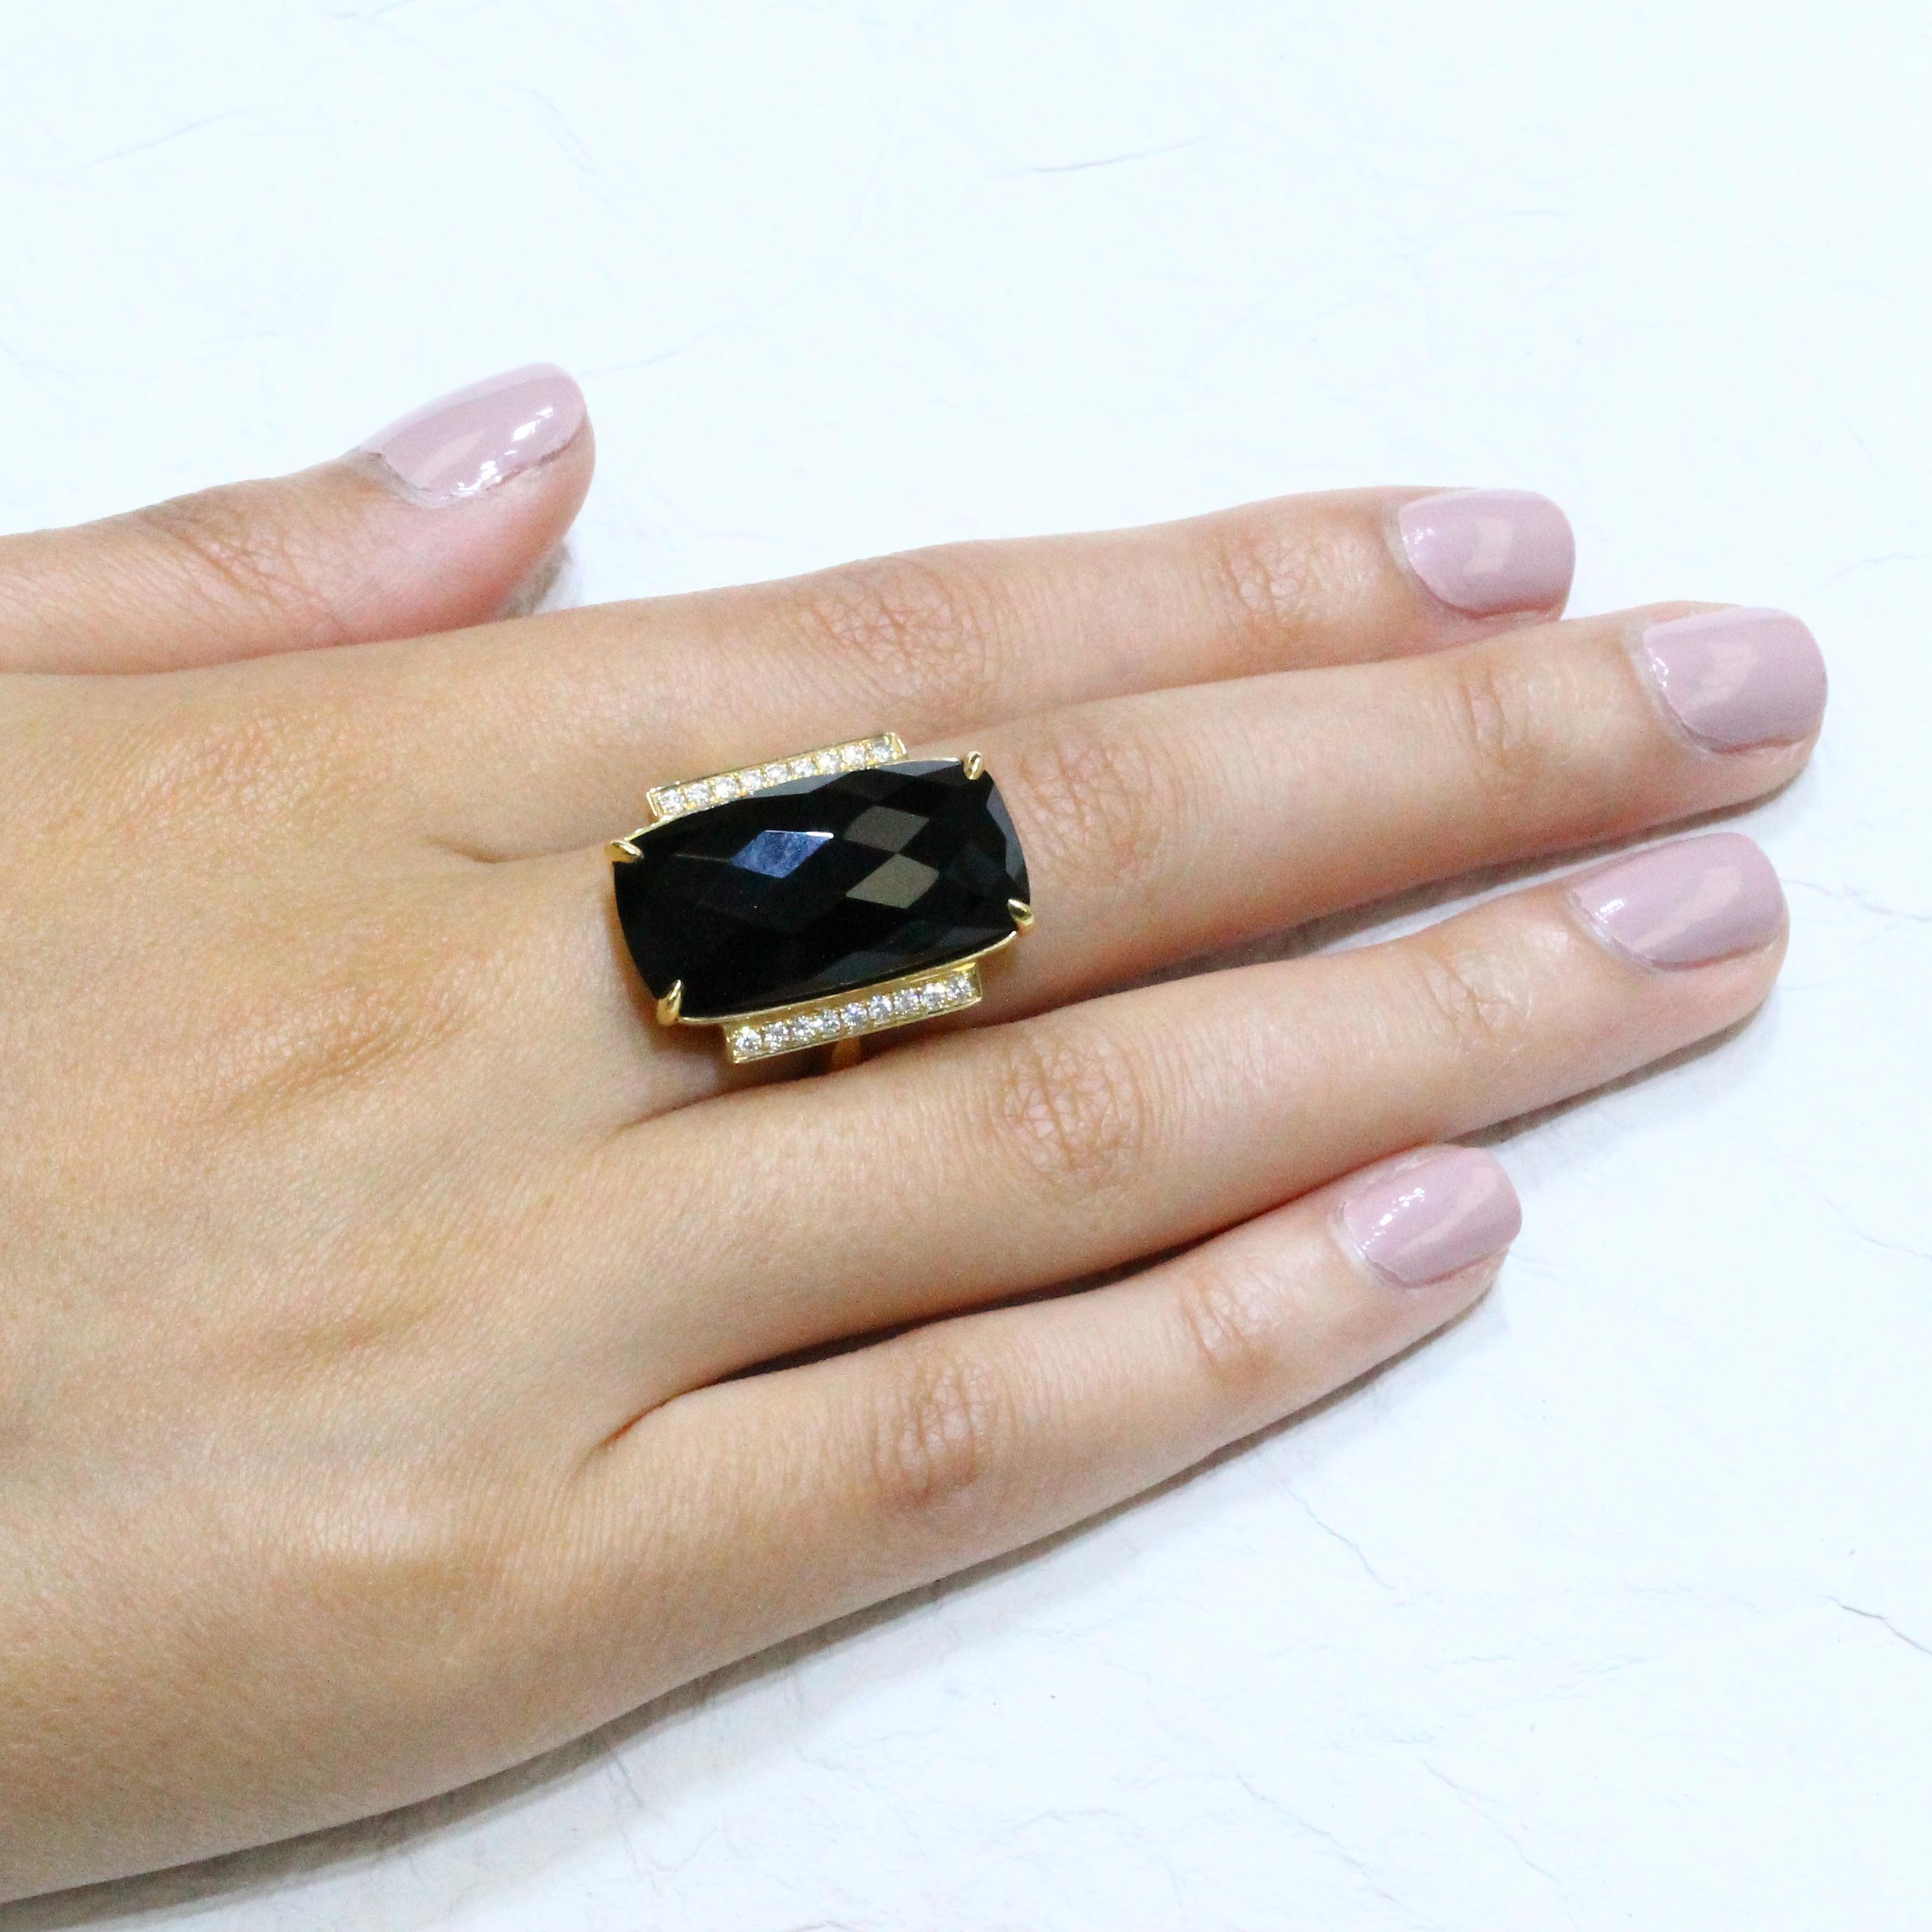 18K Yellow Gold Art-Deco style Ring featuring Checkerboard Faceted, Cushion Shaped Black Onyx and Diamonds. Solid shank. Finger size 6.5, adjustable upon request/quote. The Gatsby collection from Doves by Doron Paloma features exquisite art-deco